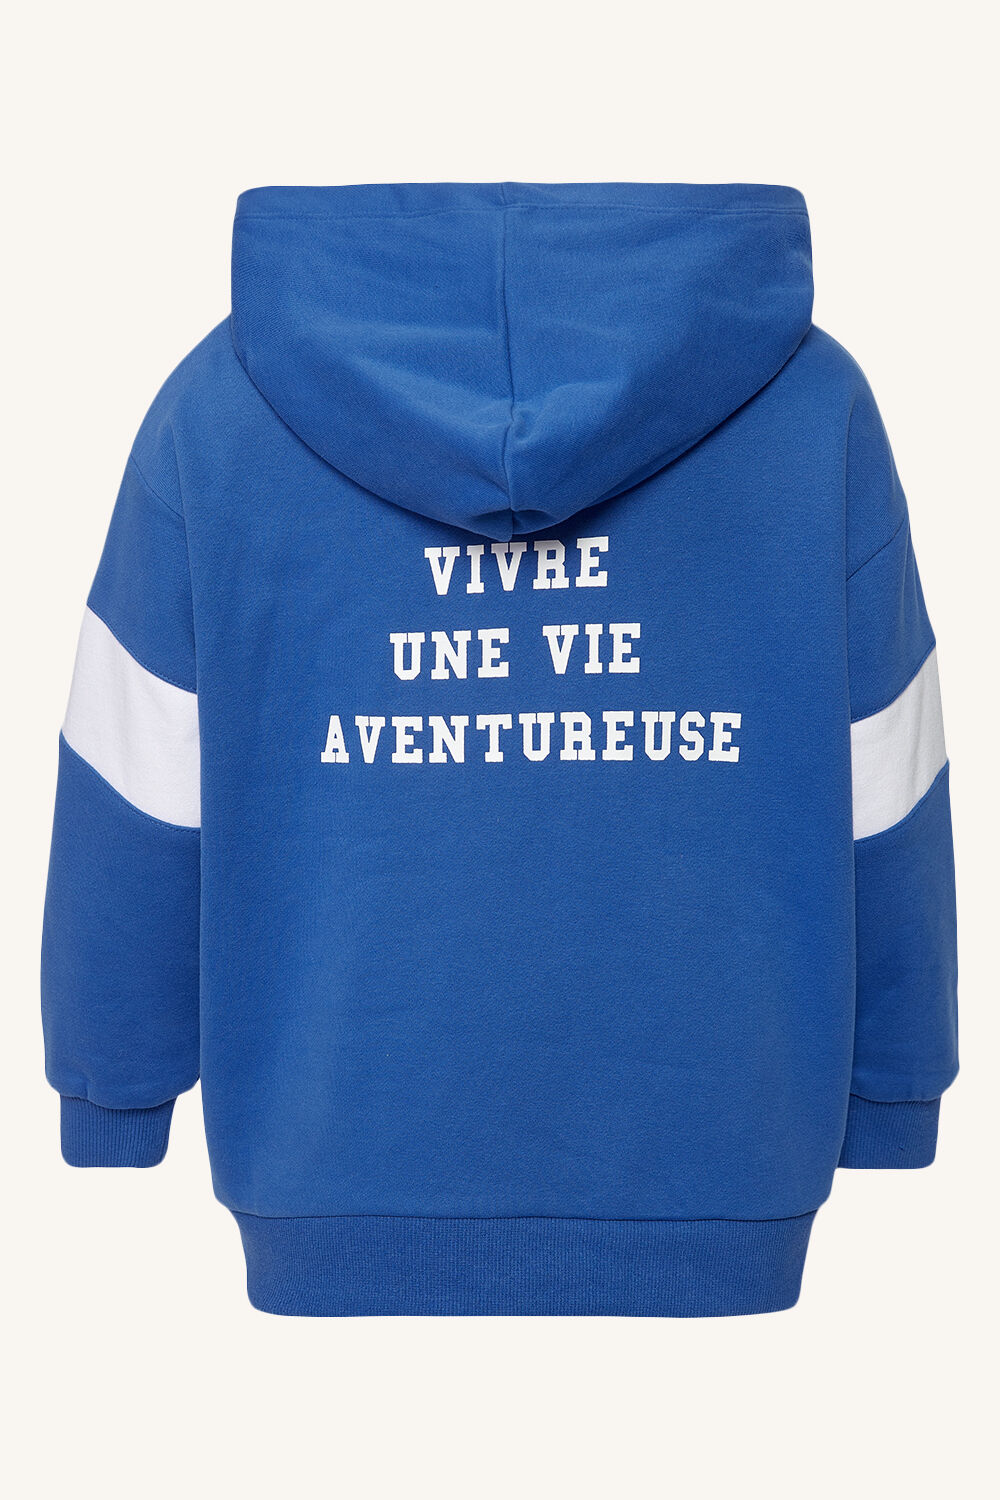 GIRLS OVERSIZED ADVENTURE HOODIE in colour DAZZLING BLUE